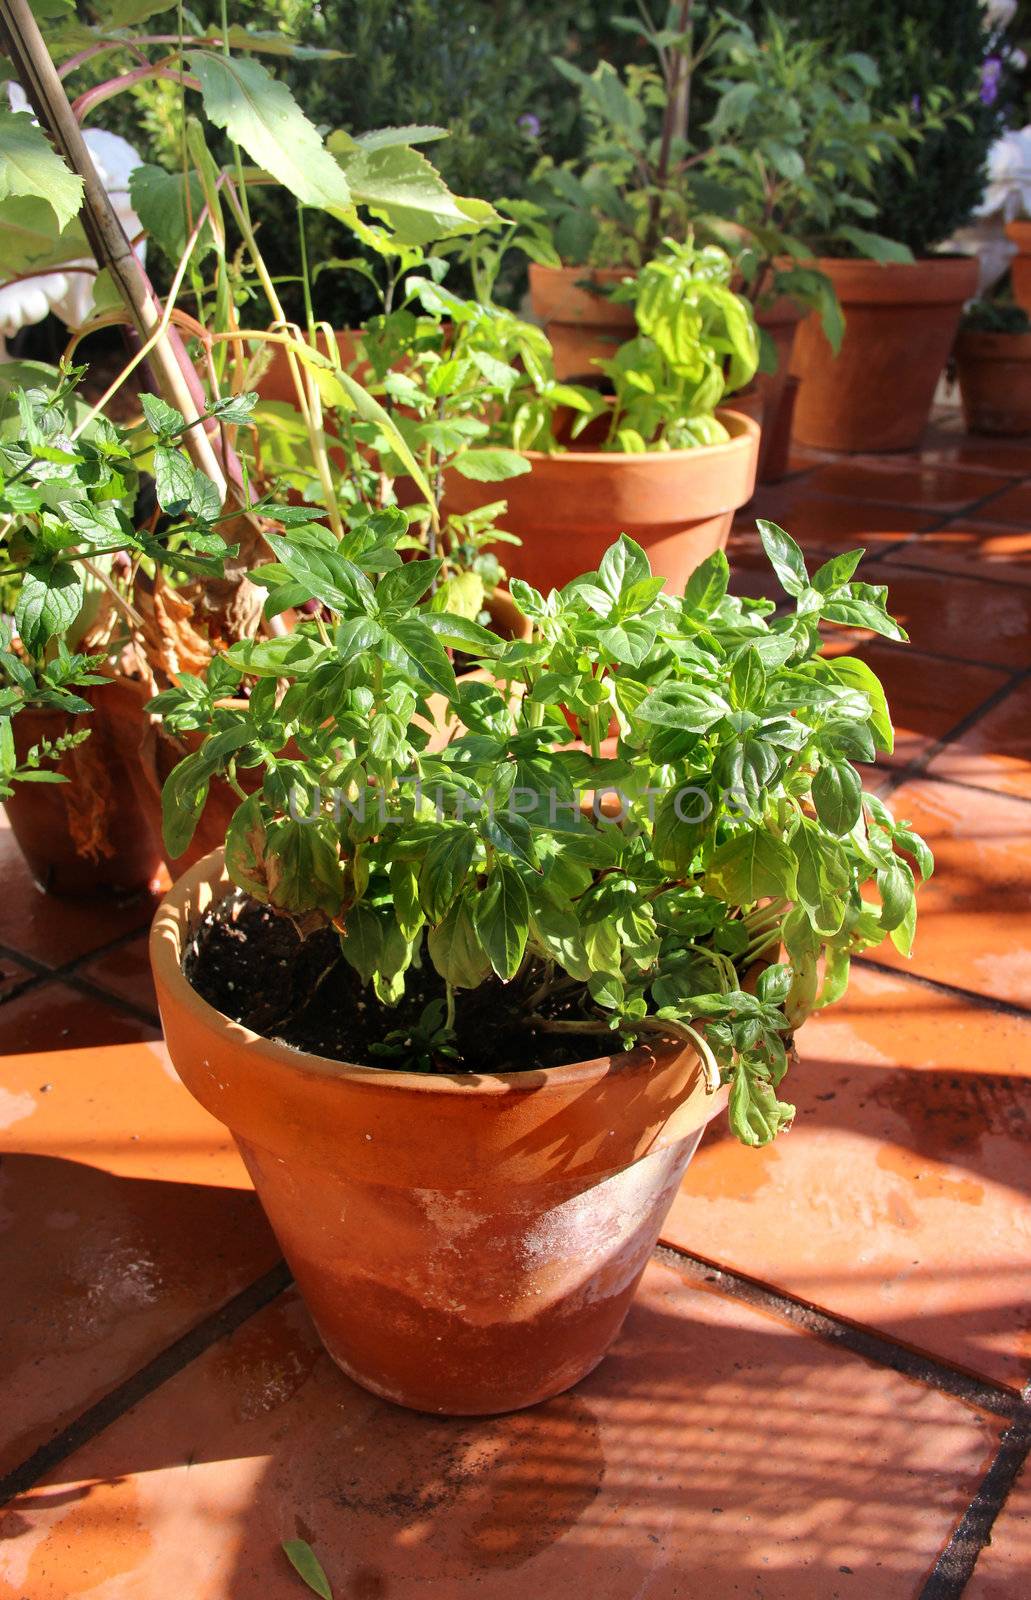 Herbs in the pot by tanouchka